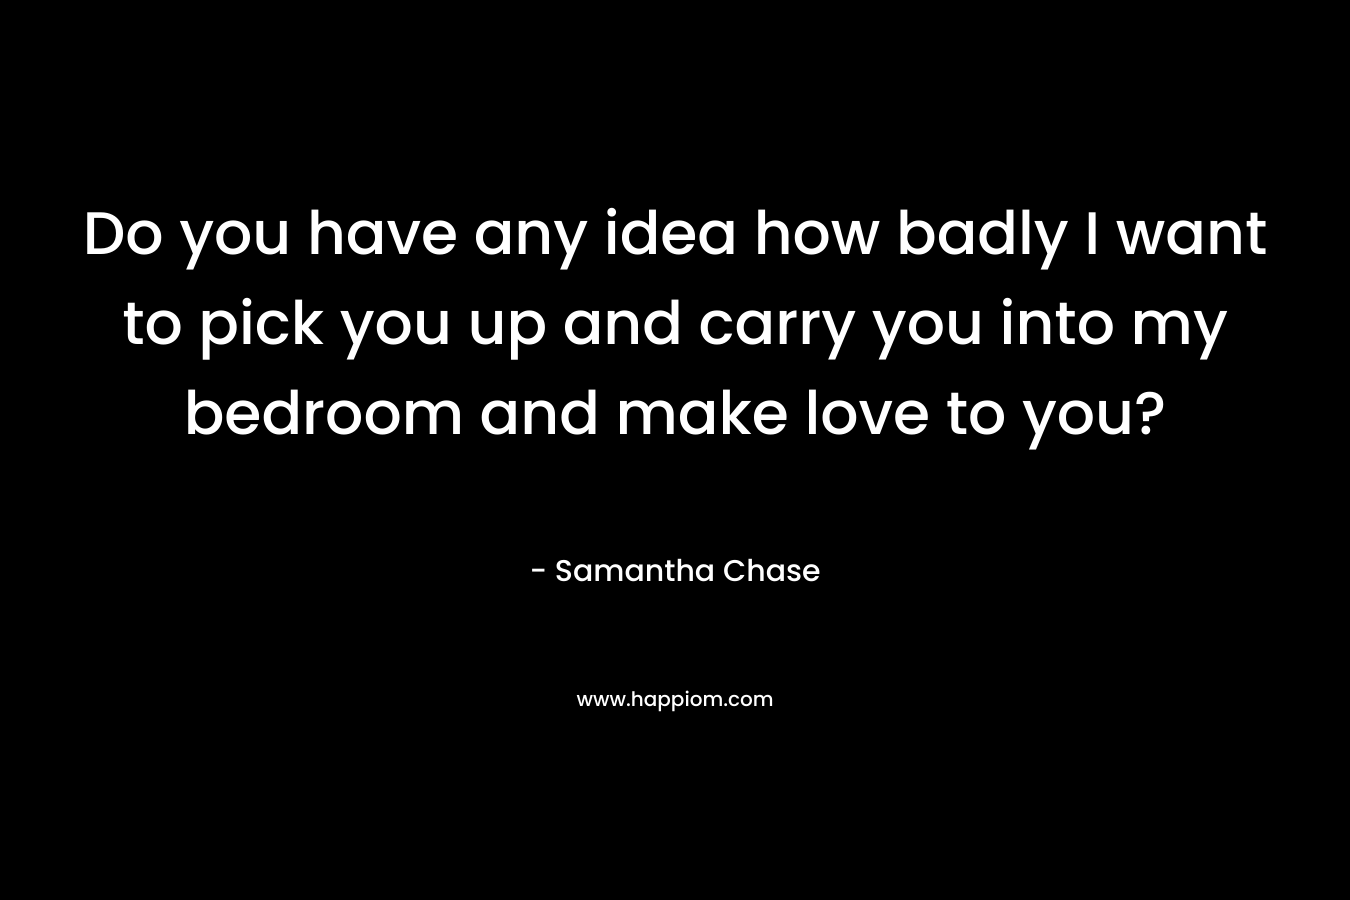 Do you have any idea how badly I want to pick you up and carry you into my bedroom and make love to you? – Samantha Chase